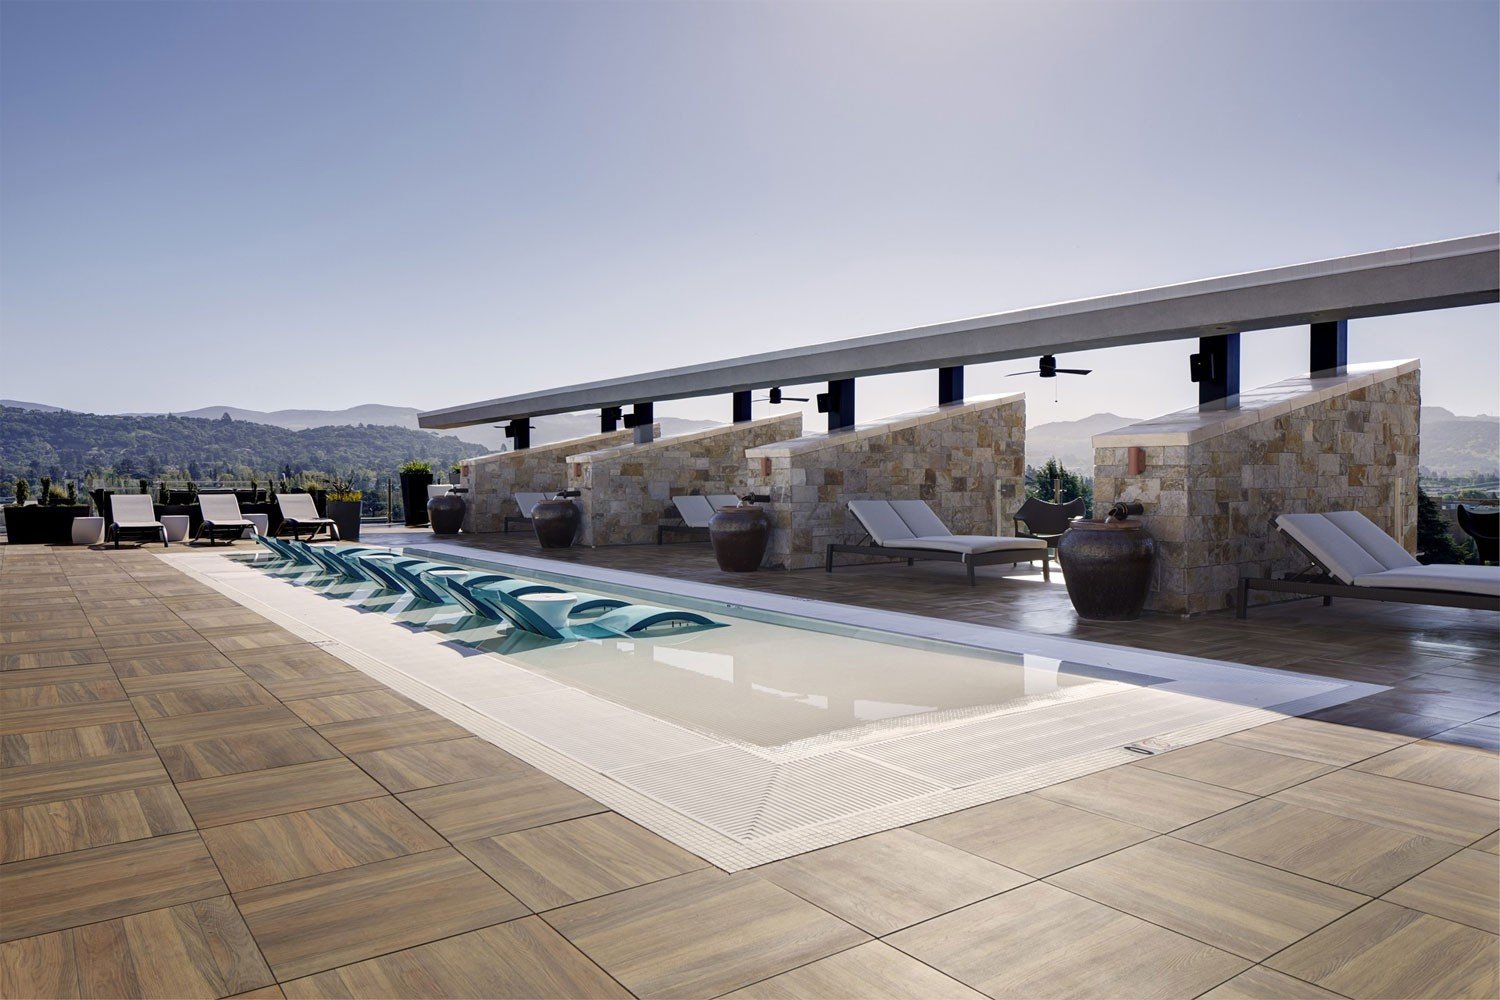 Archer Hotel Napa - water deck with loungers